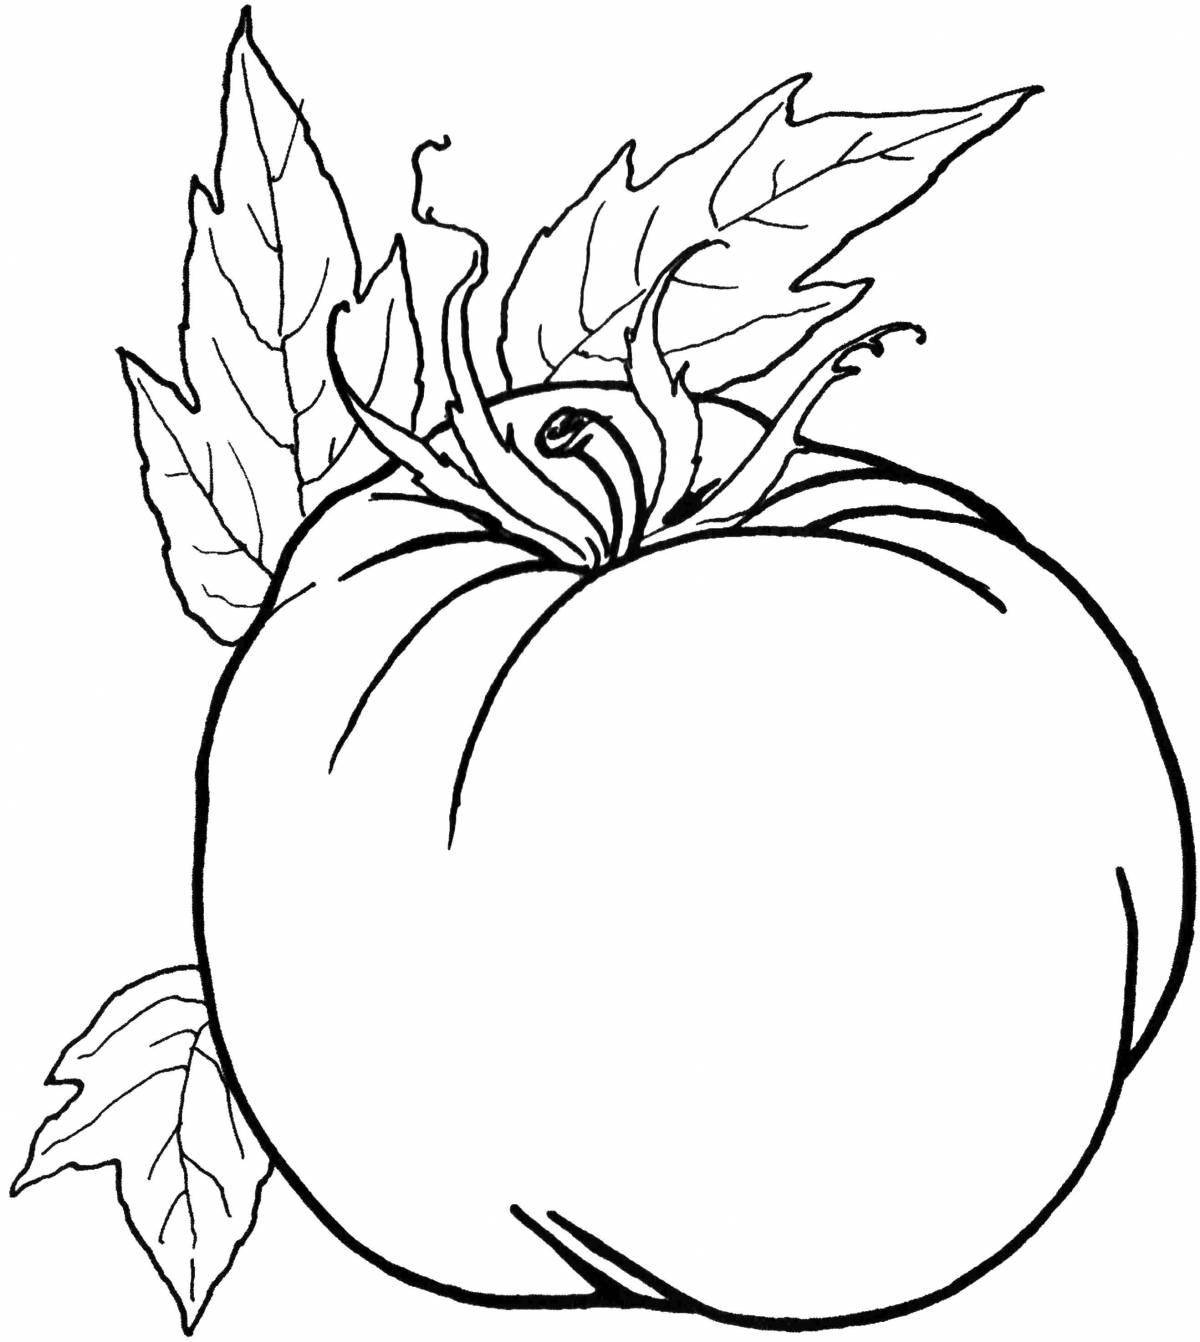 Playful tomato coloring page for kids